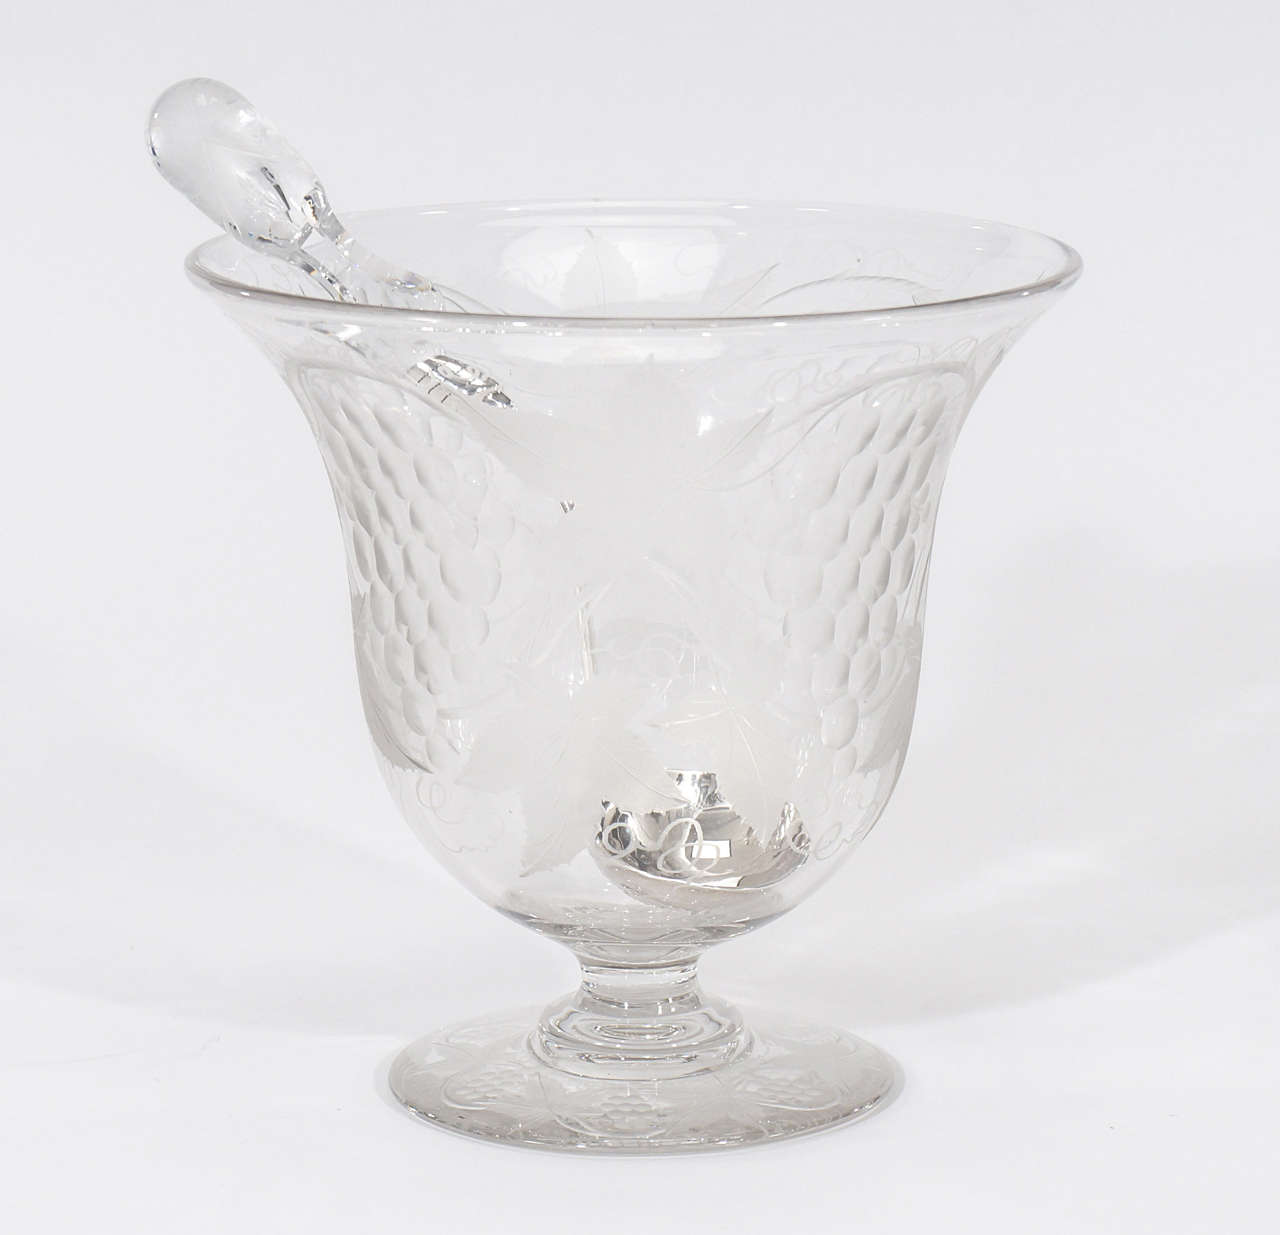 This example of a Pairpoint footed punchbowl sets te=he bar high! It even has the elusive matching signed ladle with an engraved crystal handle. The hand blown crystal bowl is engraved in the "Vintage" pattern, encircled with grapes and